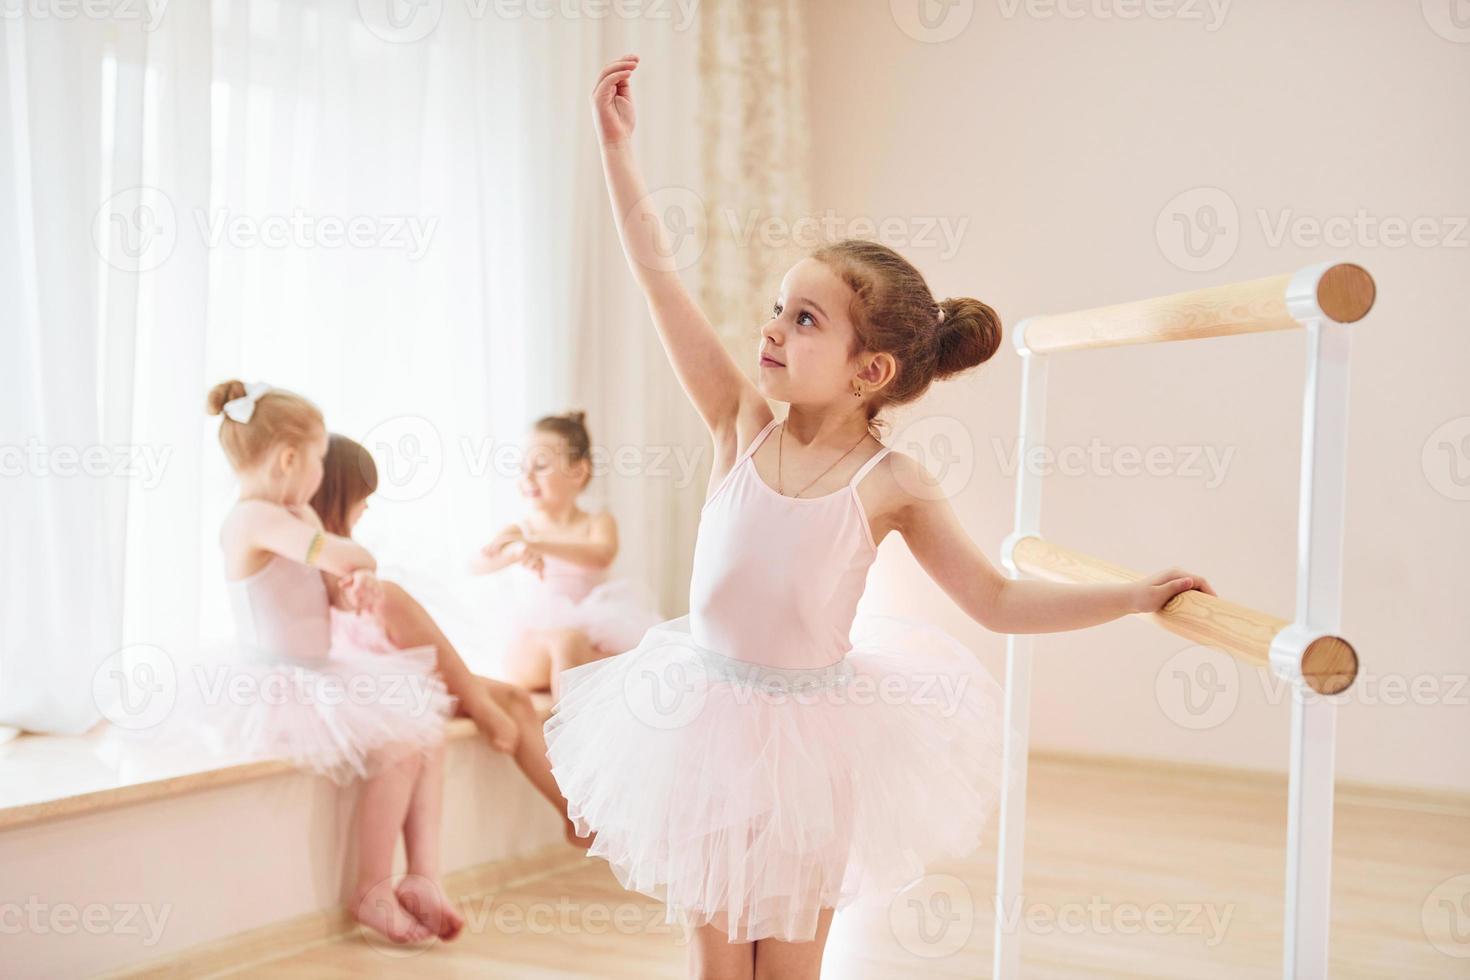 Posing for a camera. Little ballerinas preparing for performance photo